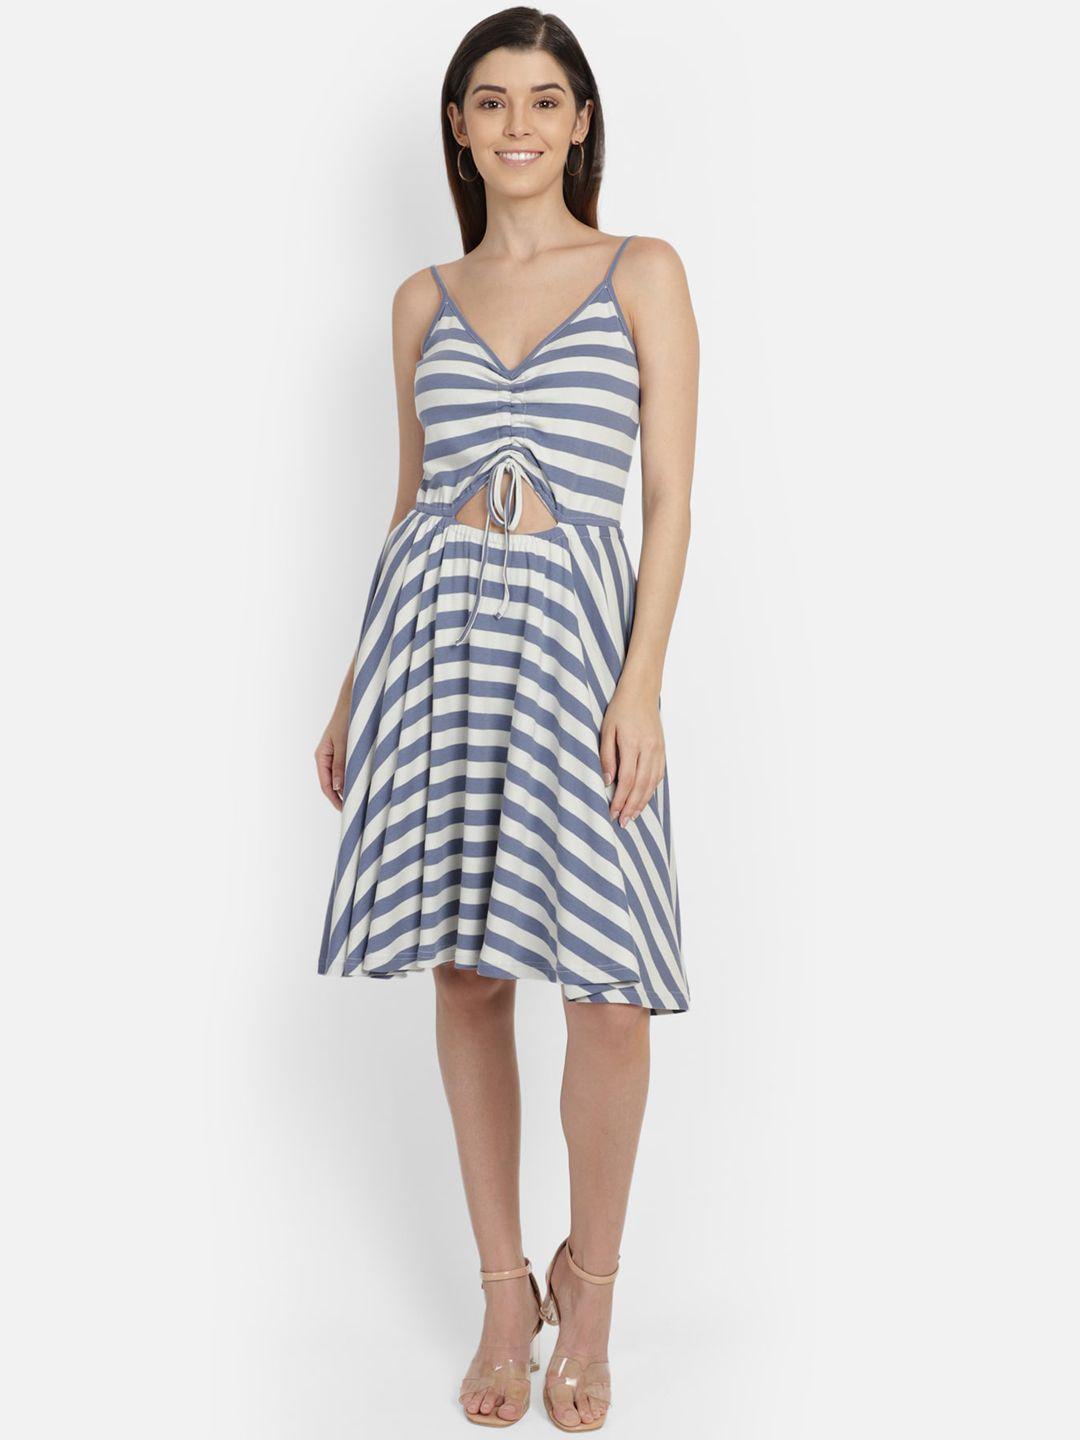 yaadleen women blue & white striped fit and flare dress